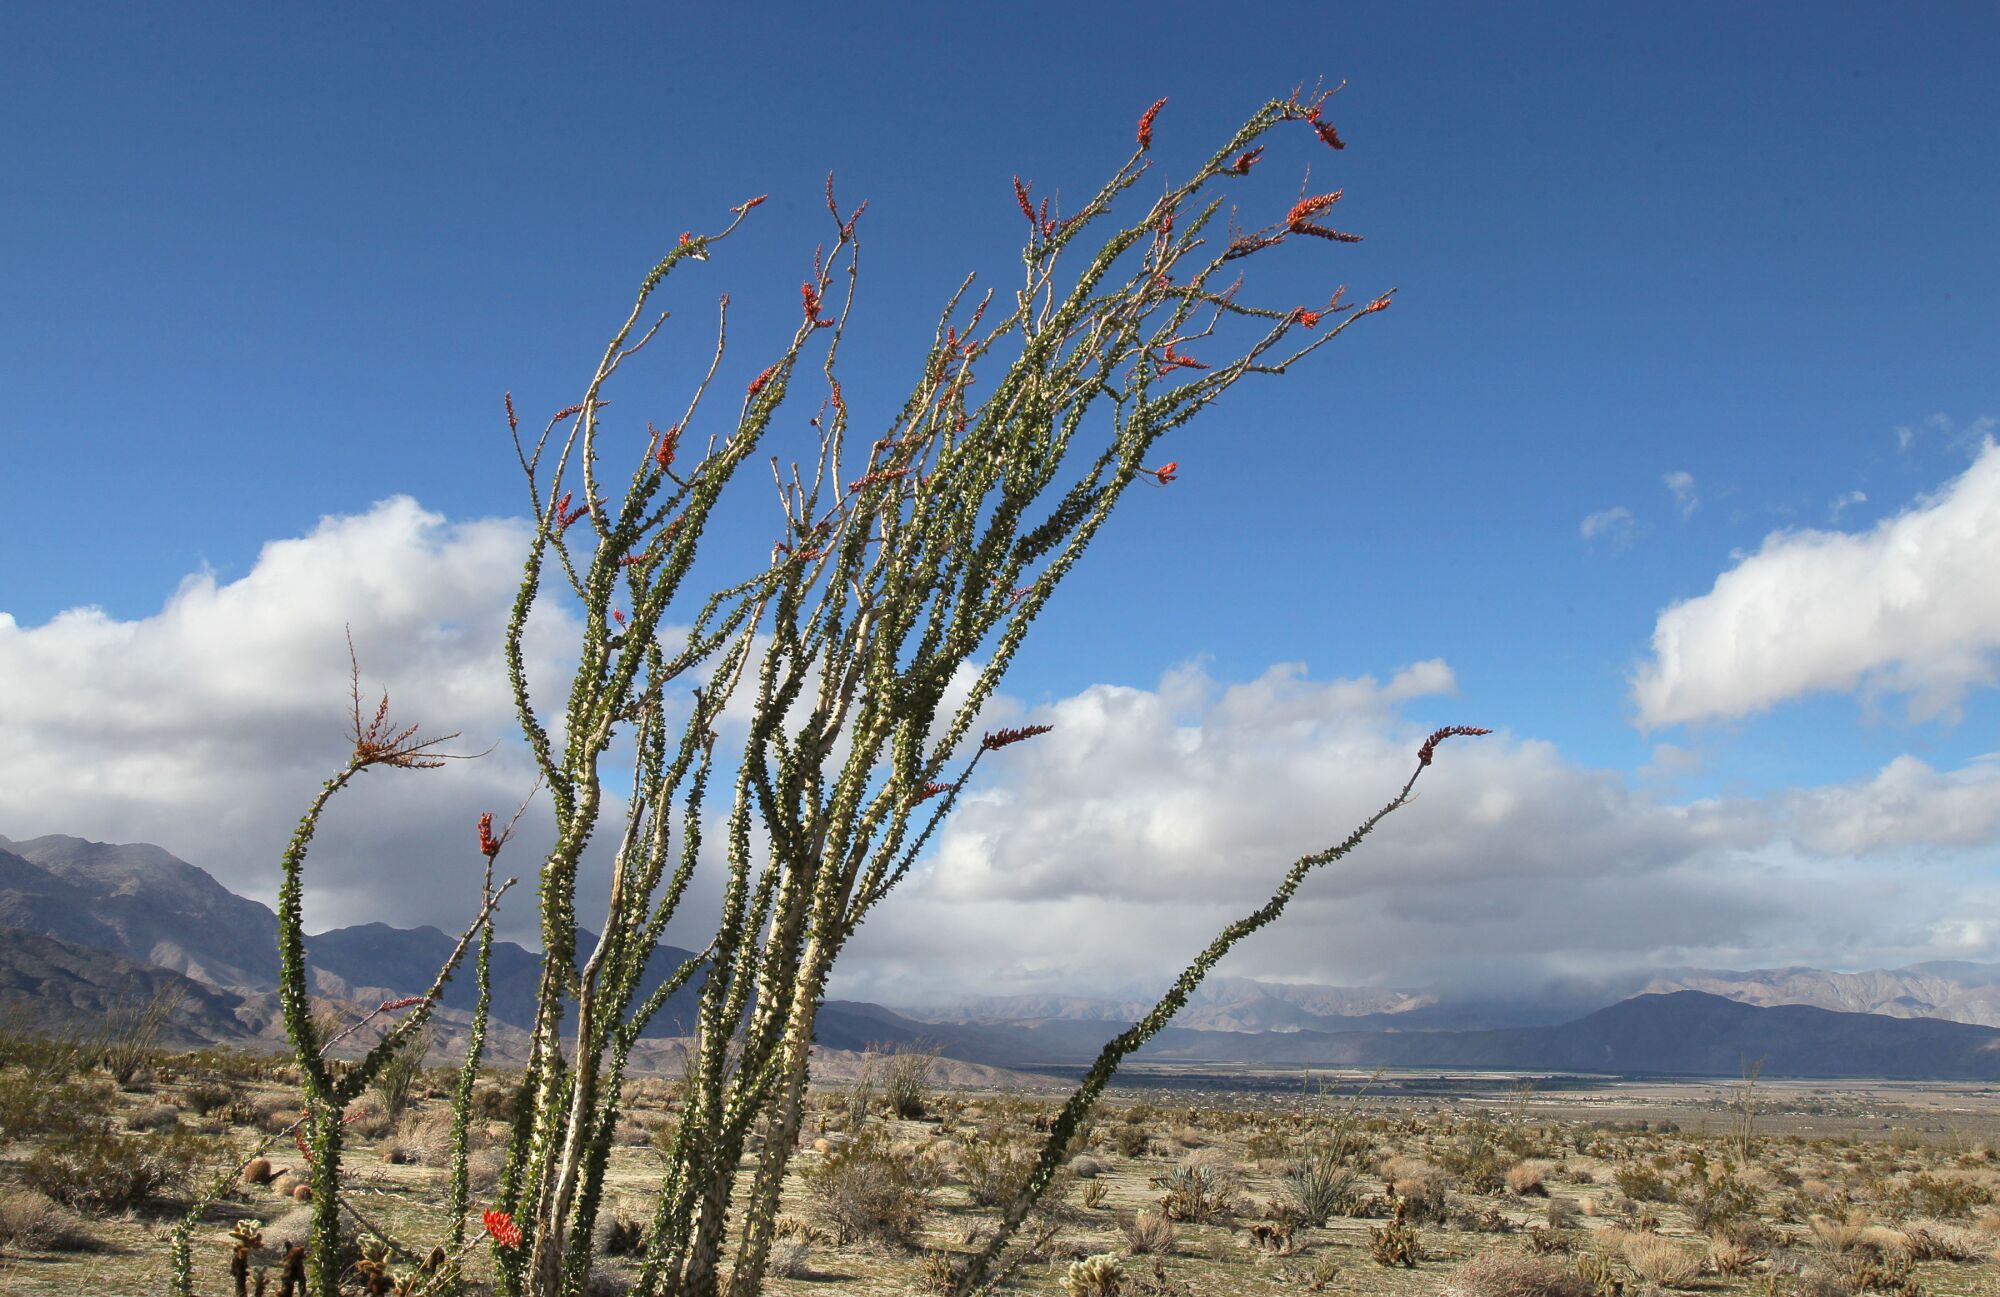 Detail view of an Ocotillo plant with some red flowers.